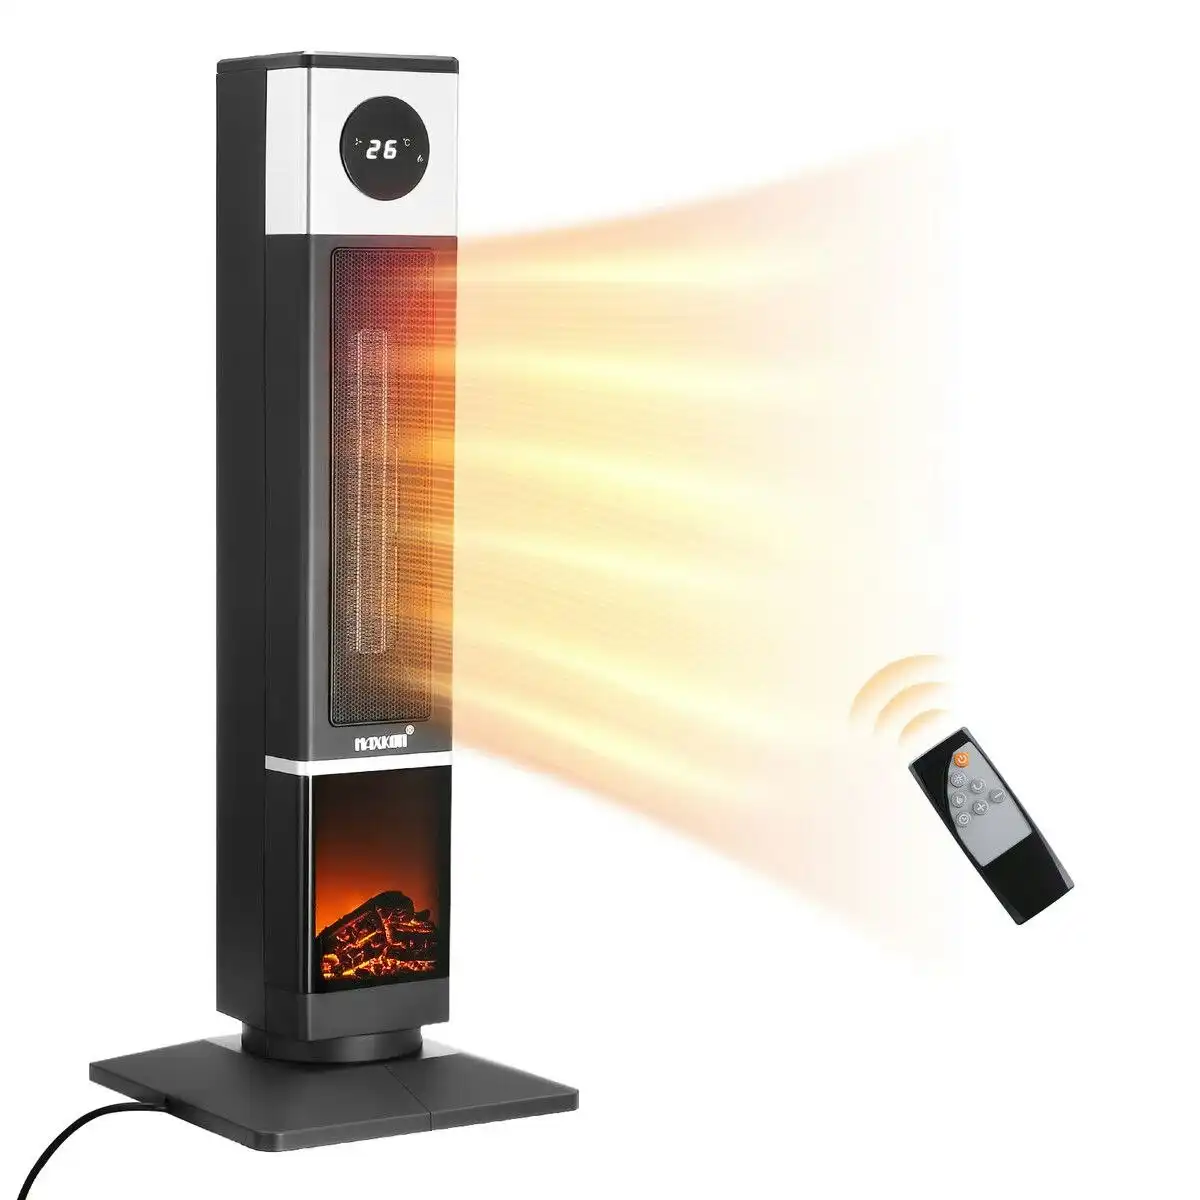 Maxkon 2000W Electric Heater Tower Energy Efficient Space Portable Indoor Fireplace Instant Warmer Oscillating Cooling Fan Bedroom Remote